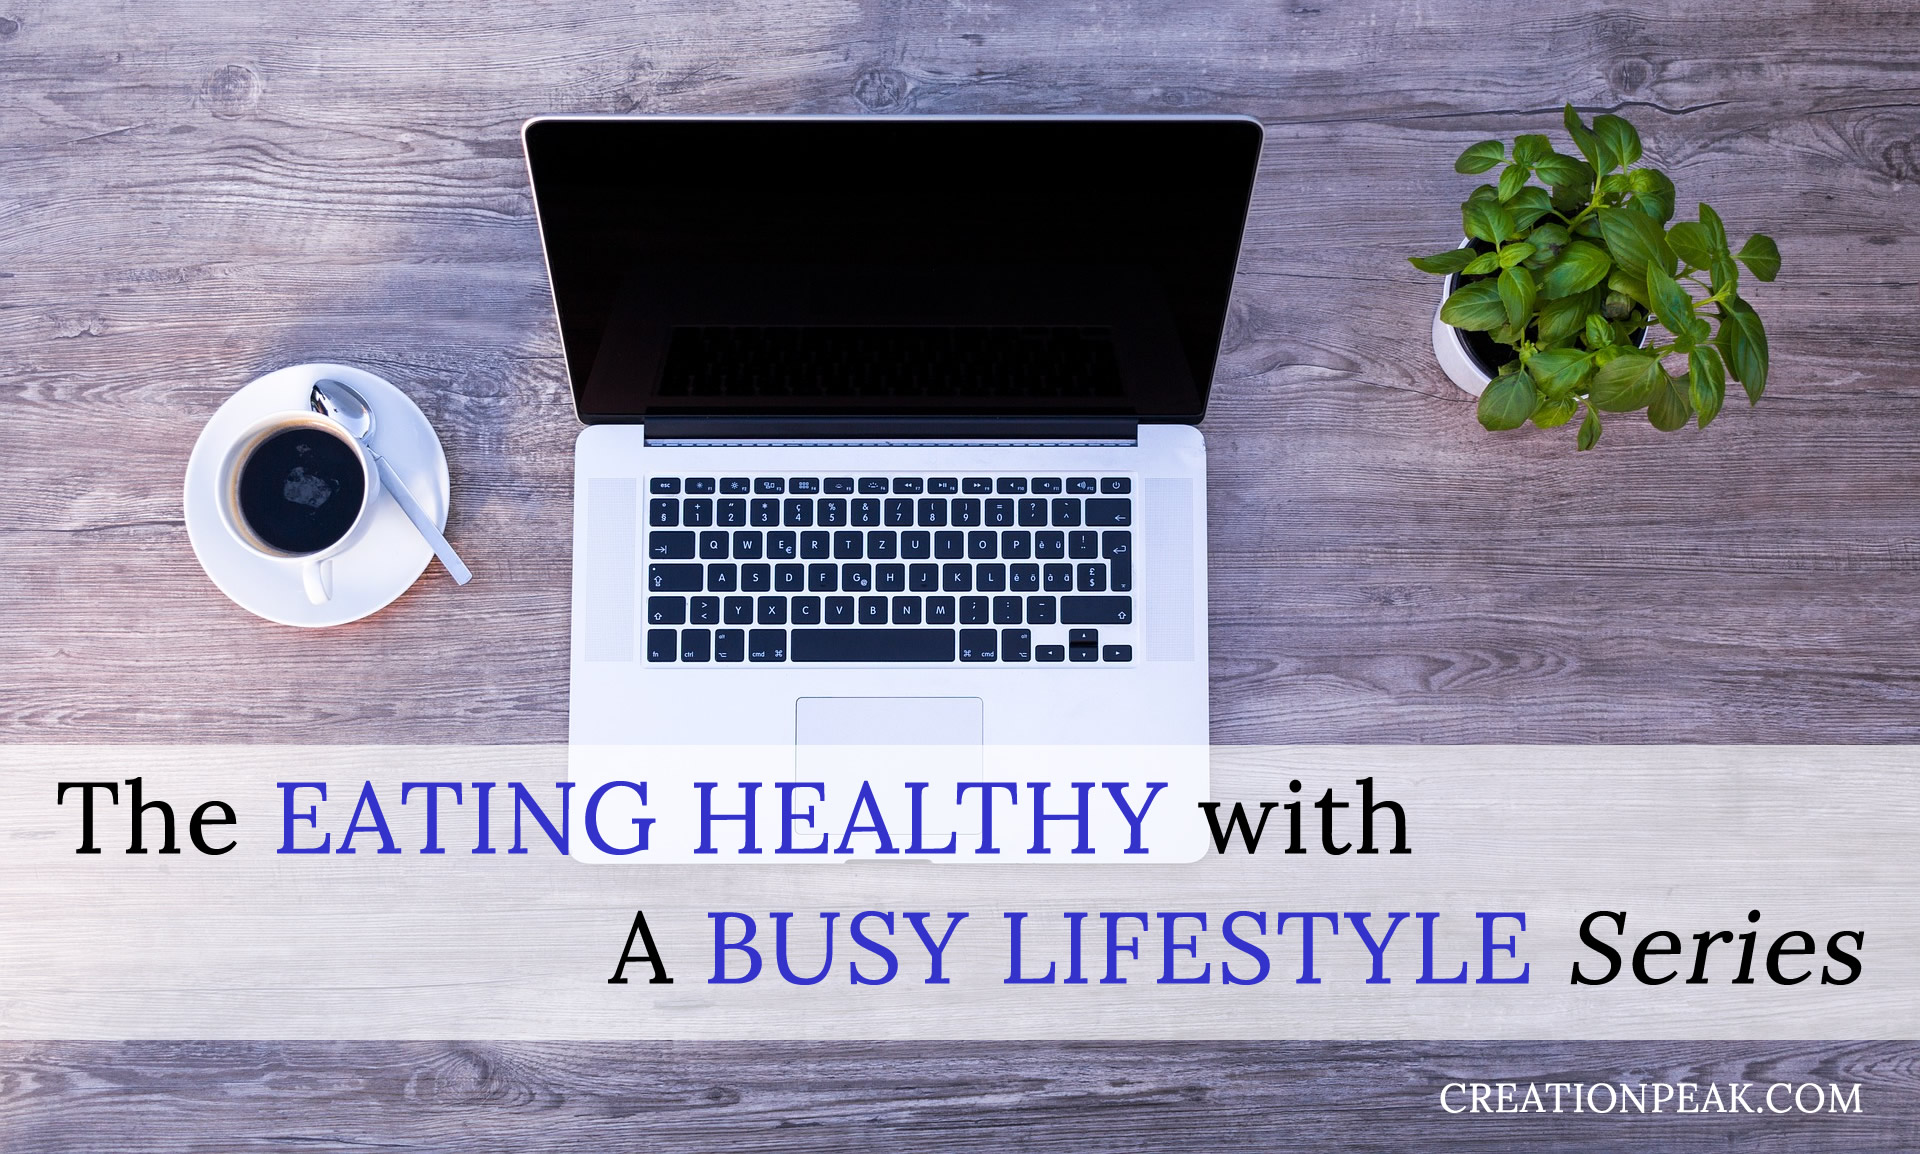 eating healthy with a busy lifestyle series image of laptop, coffee, basil plant